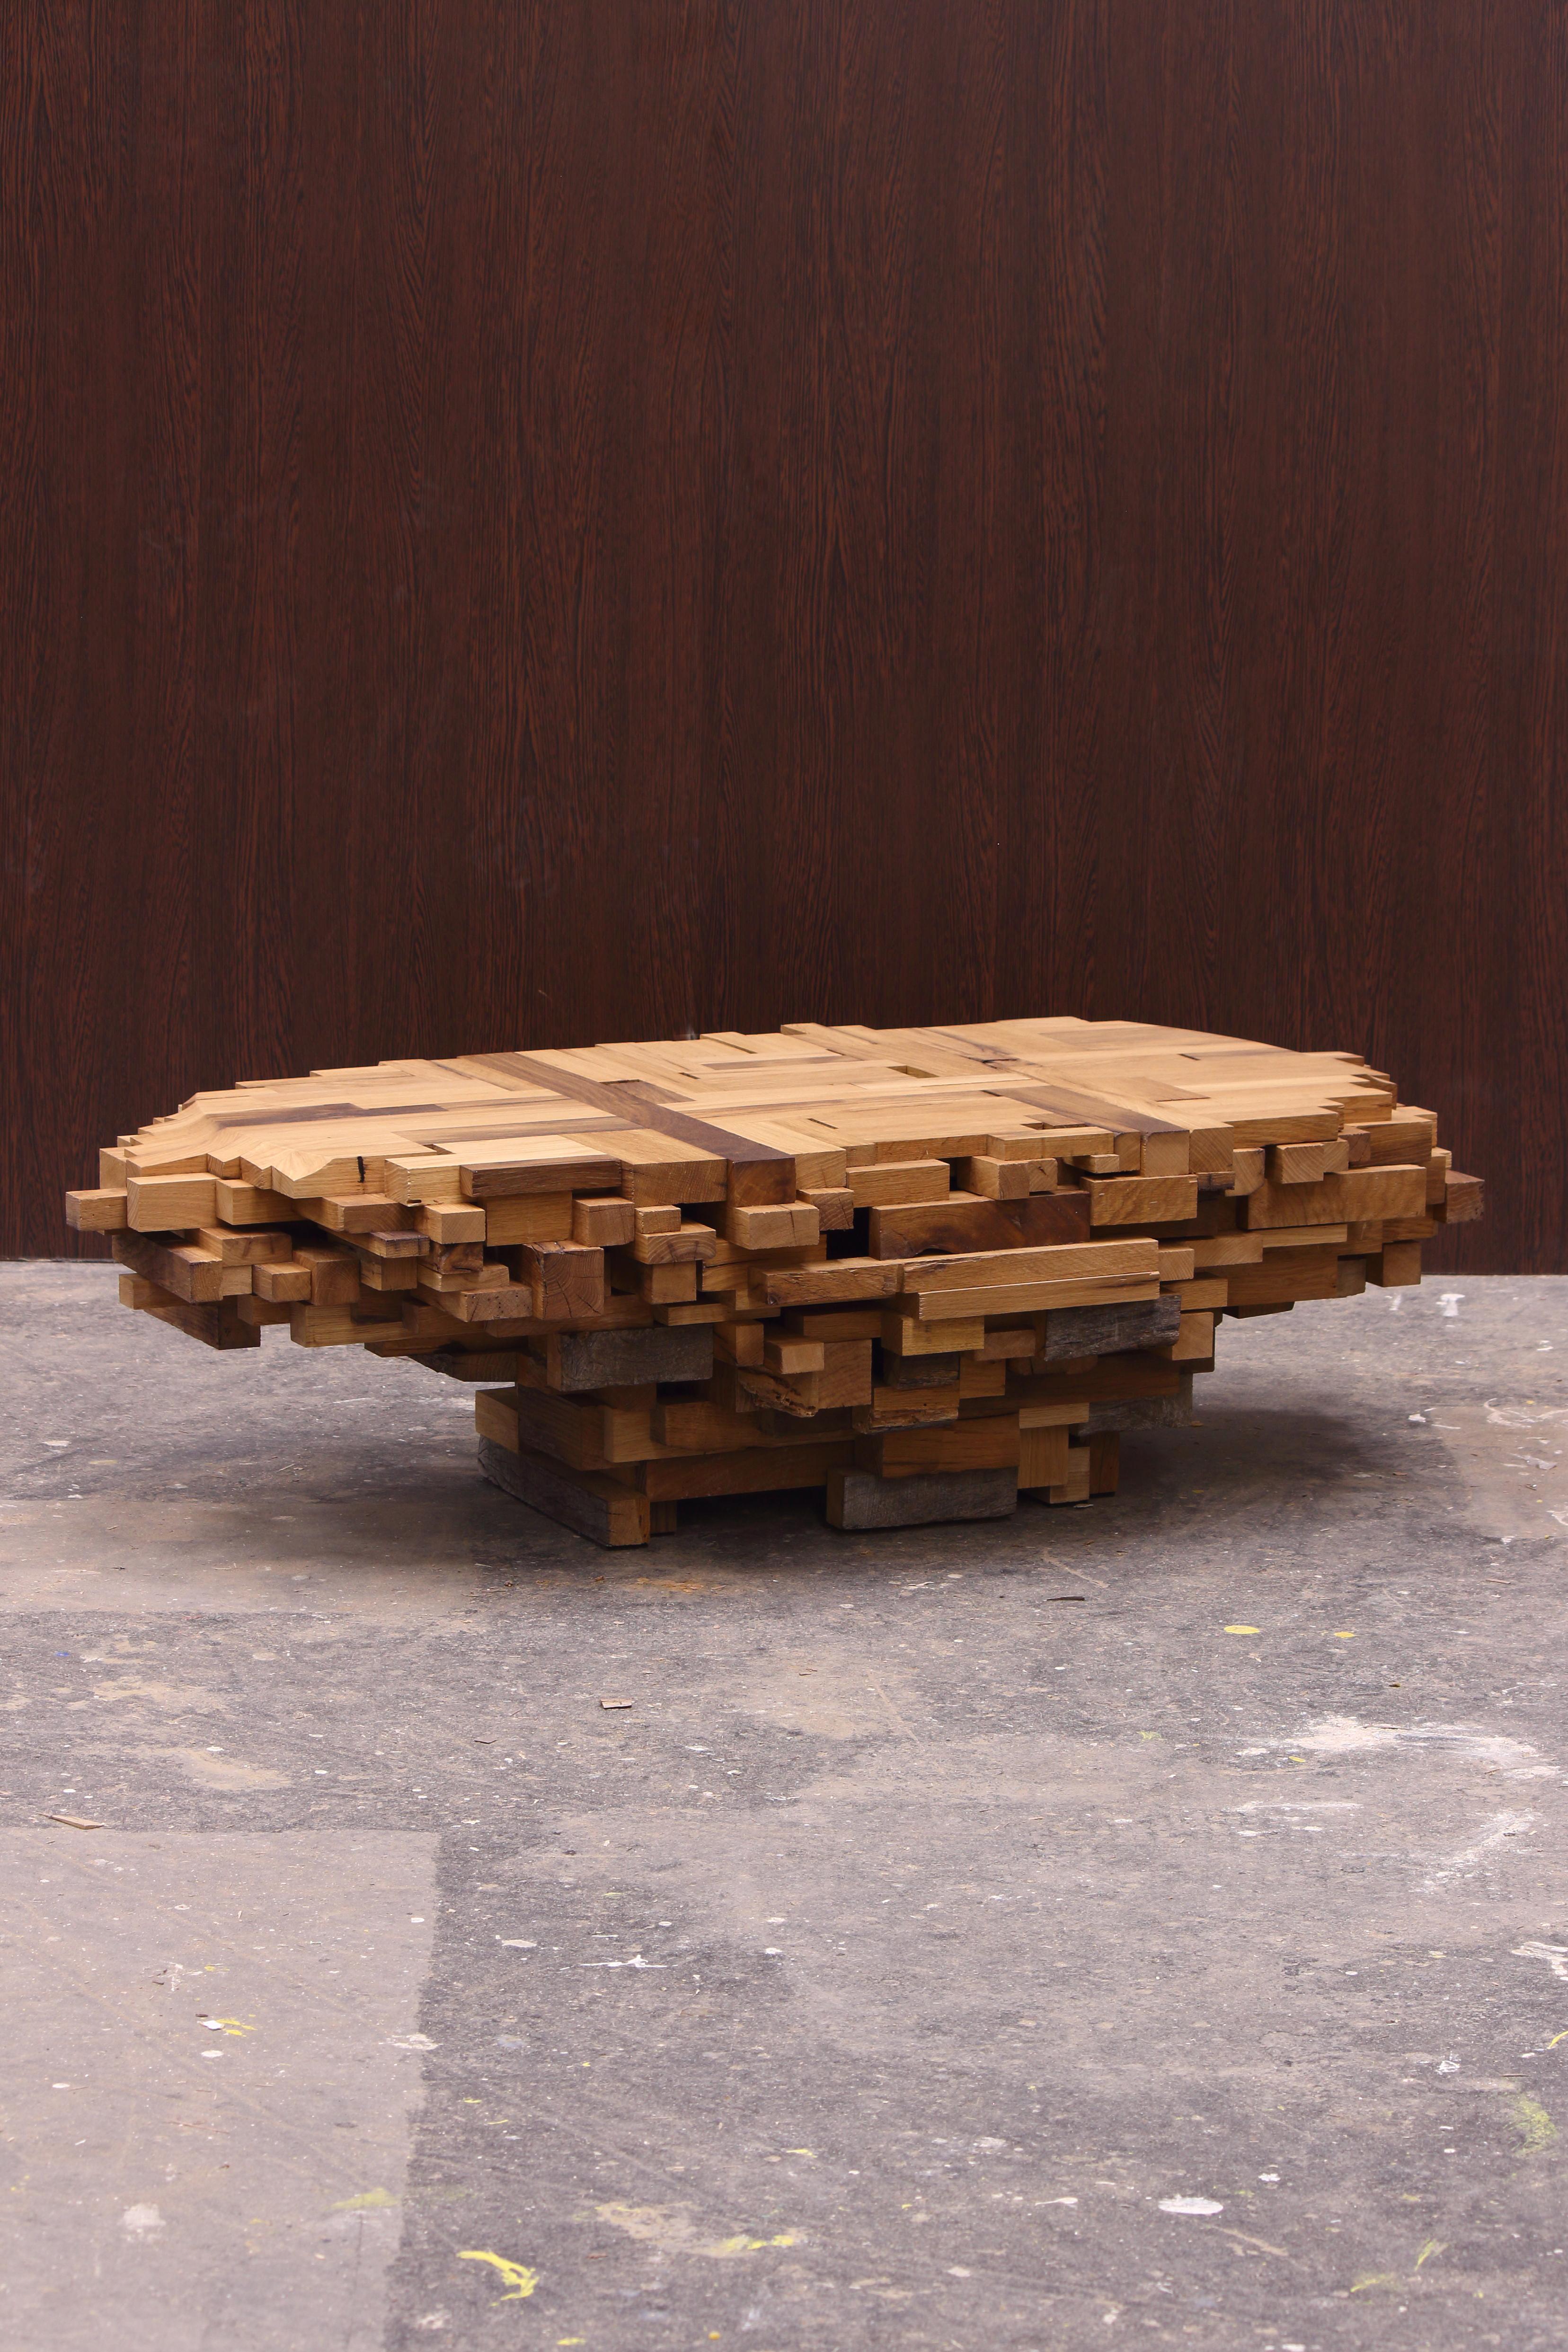 Contemporary Japanese Sculptural Oak Wood Coffee Table Subterranean by Sho Ota For Sale